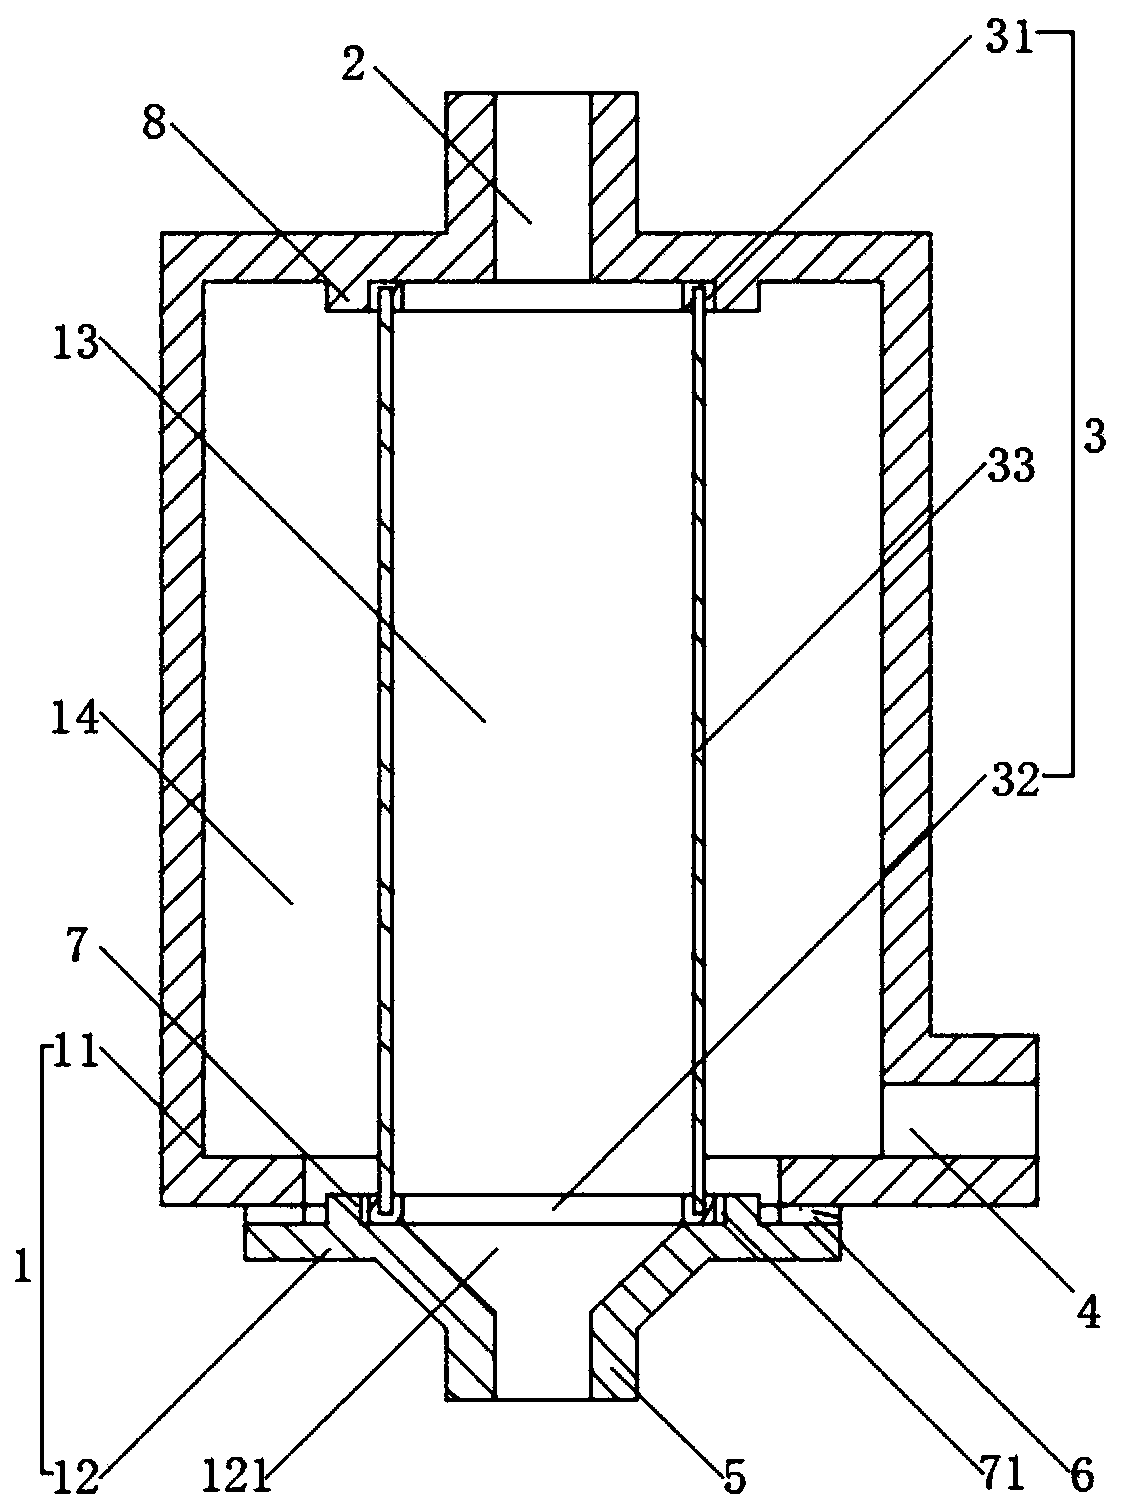 Chemical sewage filtering device and clearing method thereof